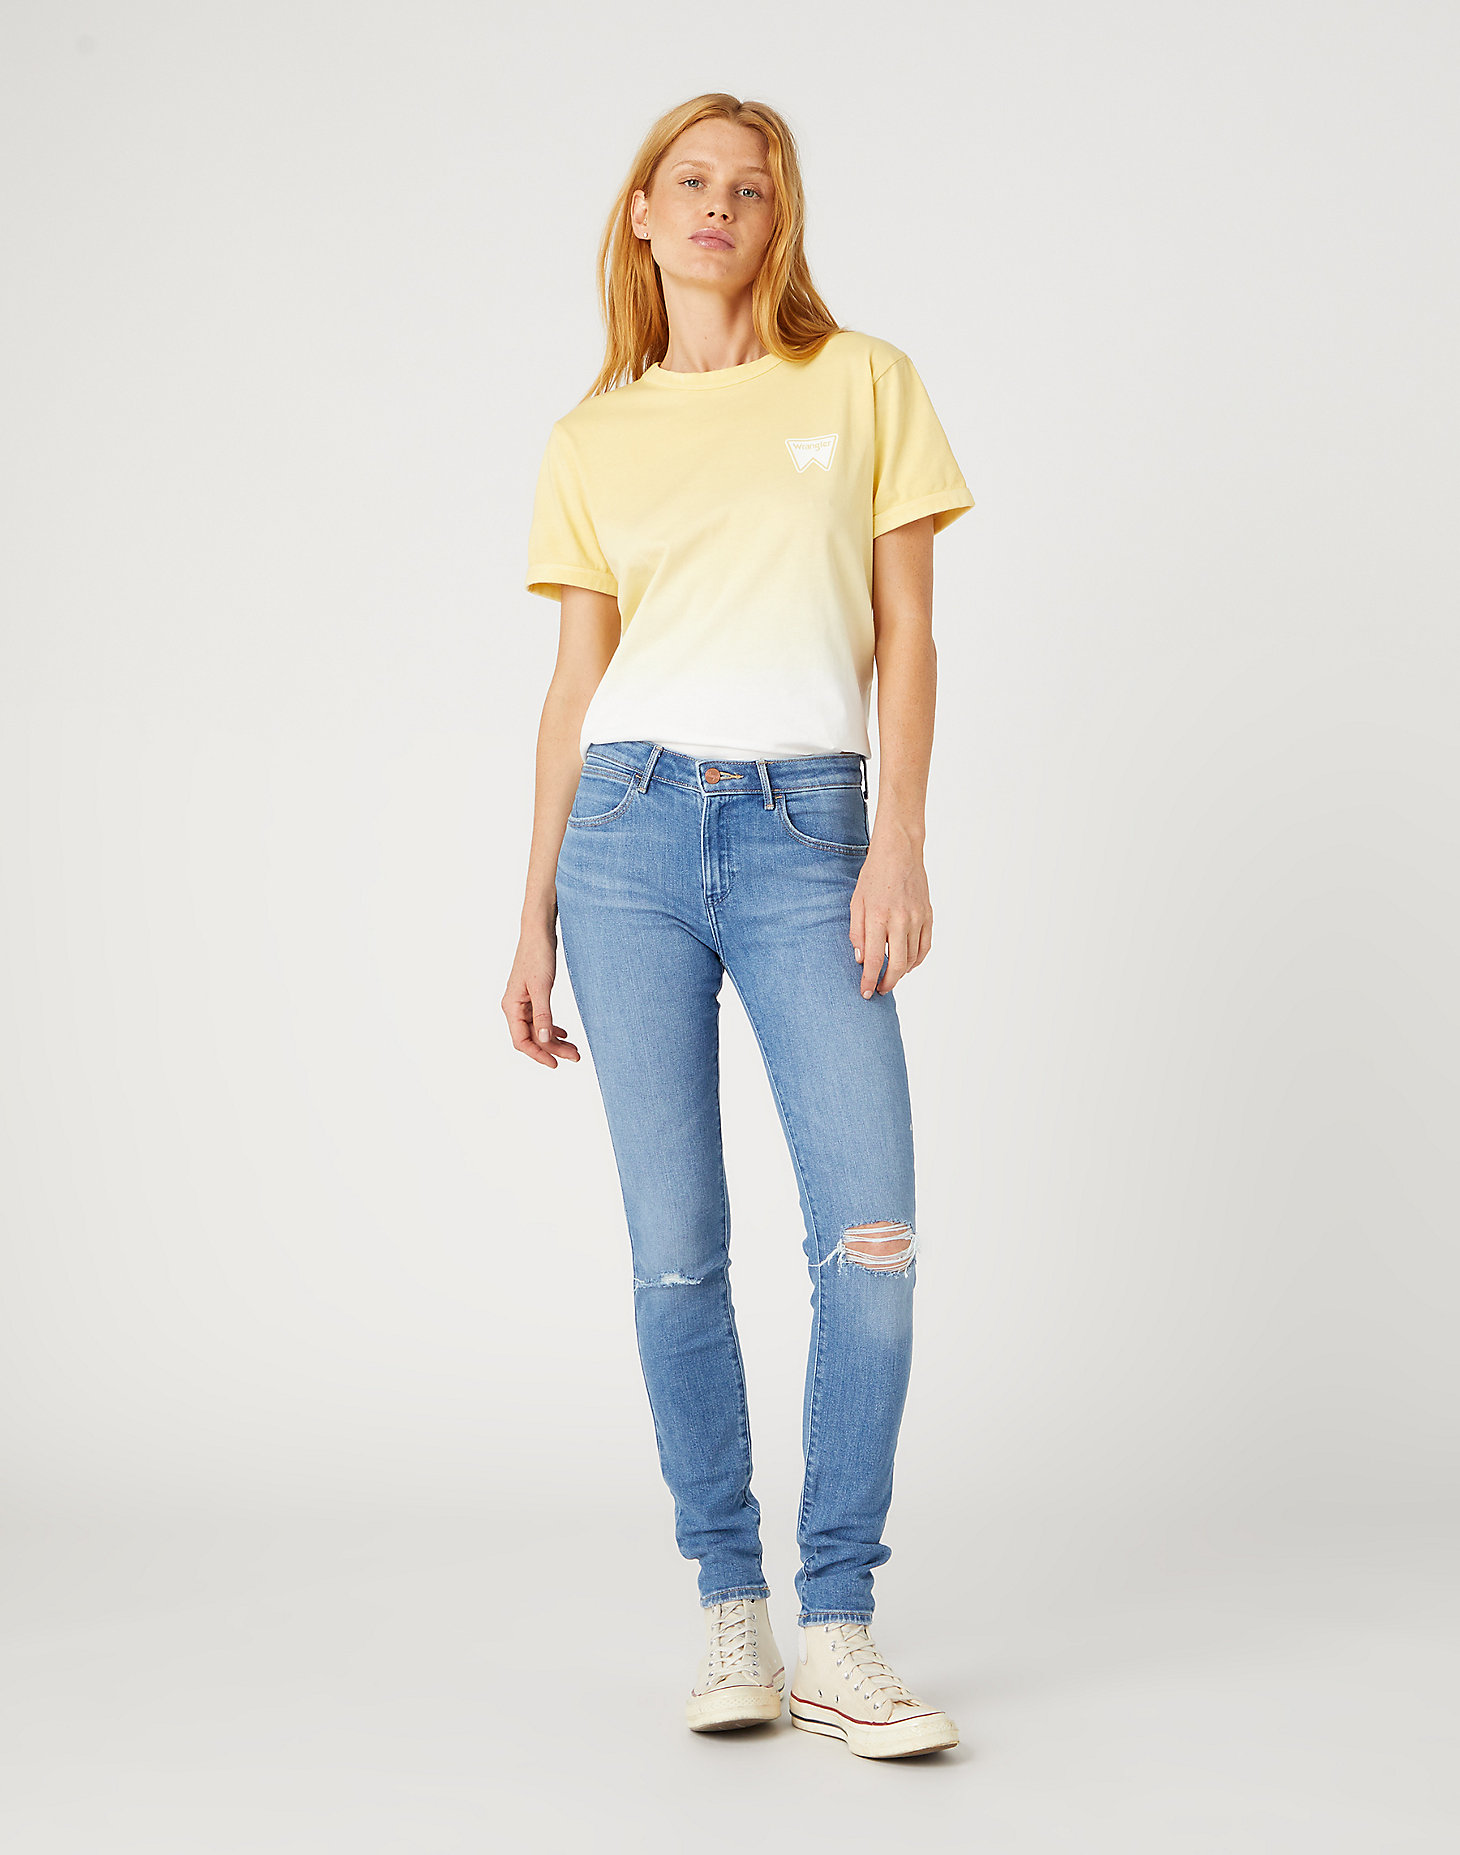 Relaxed Ringer Tee in Pale Banana alternative view 1